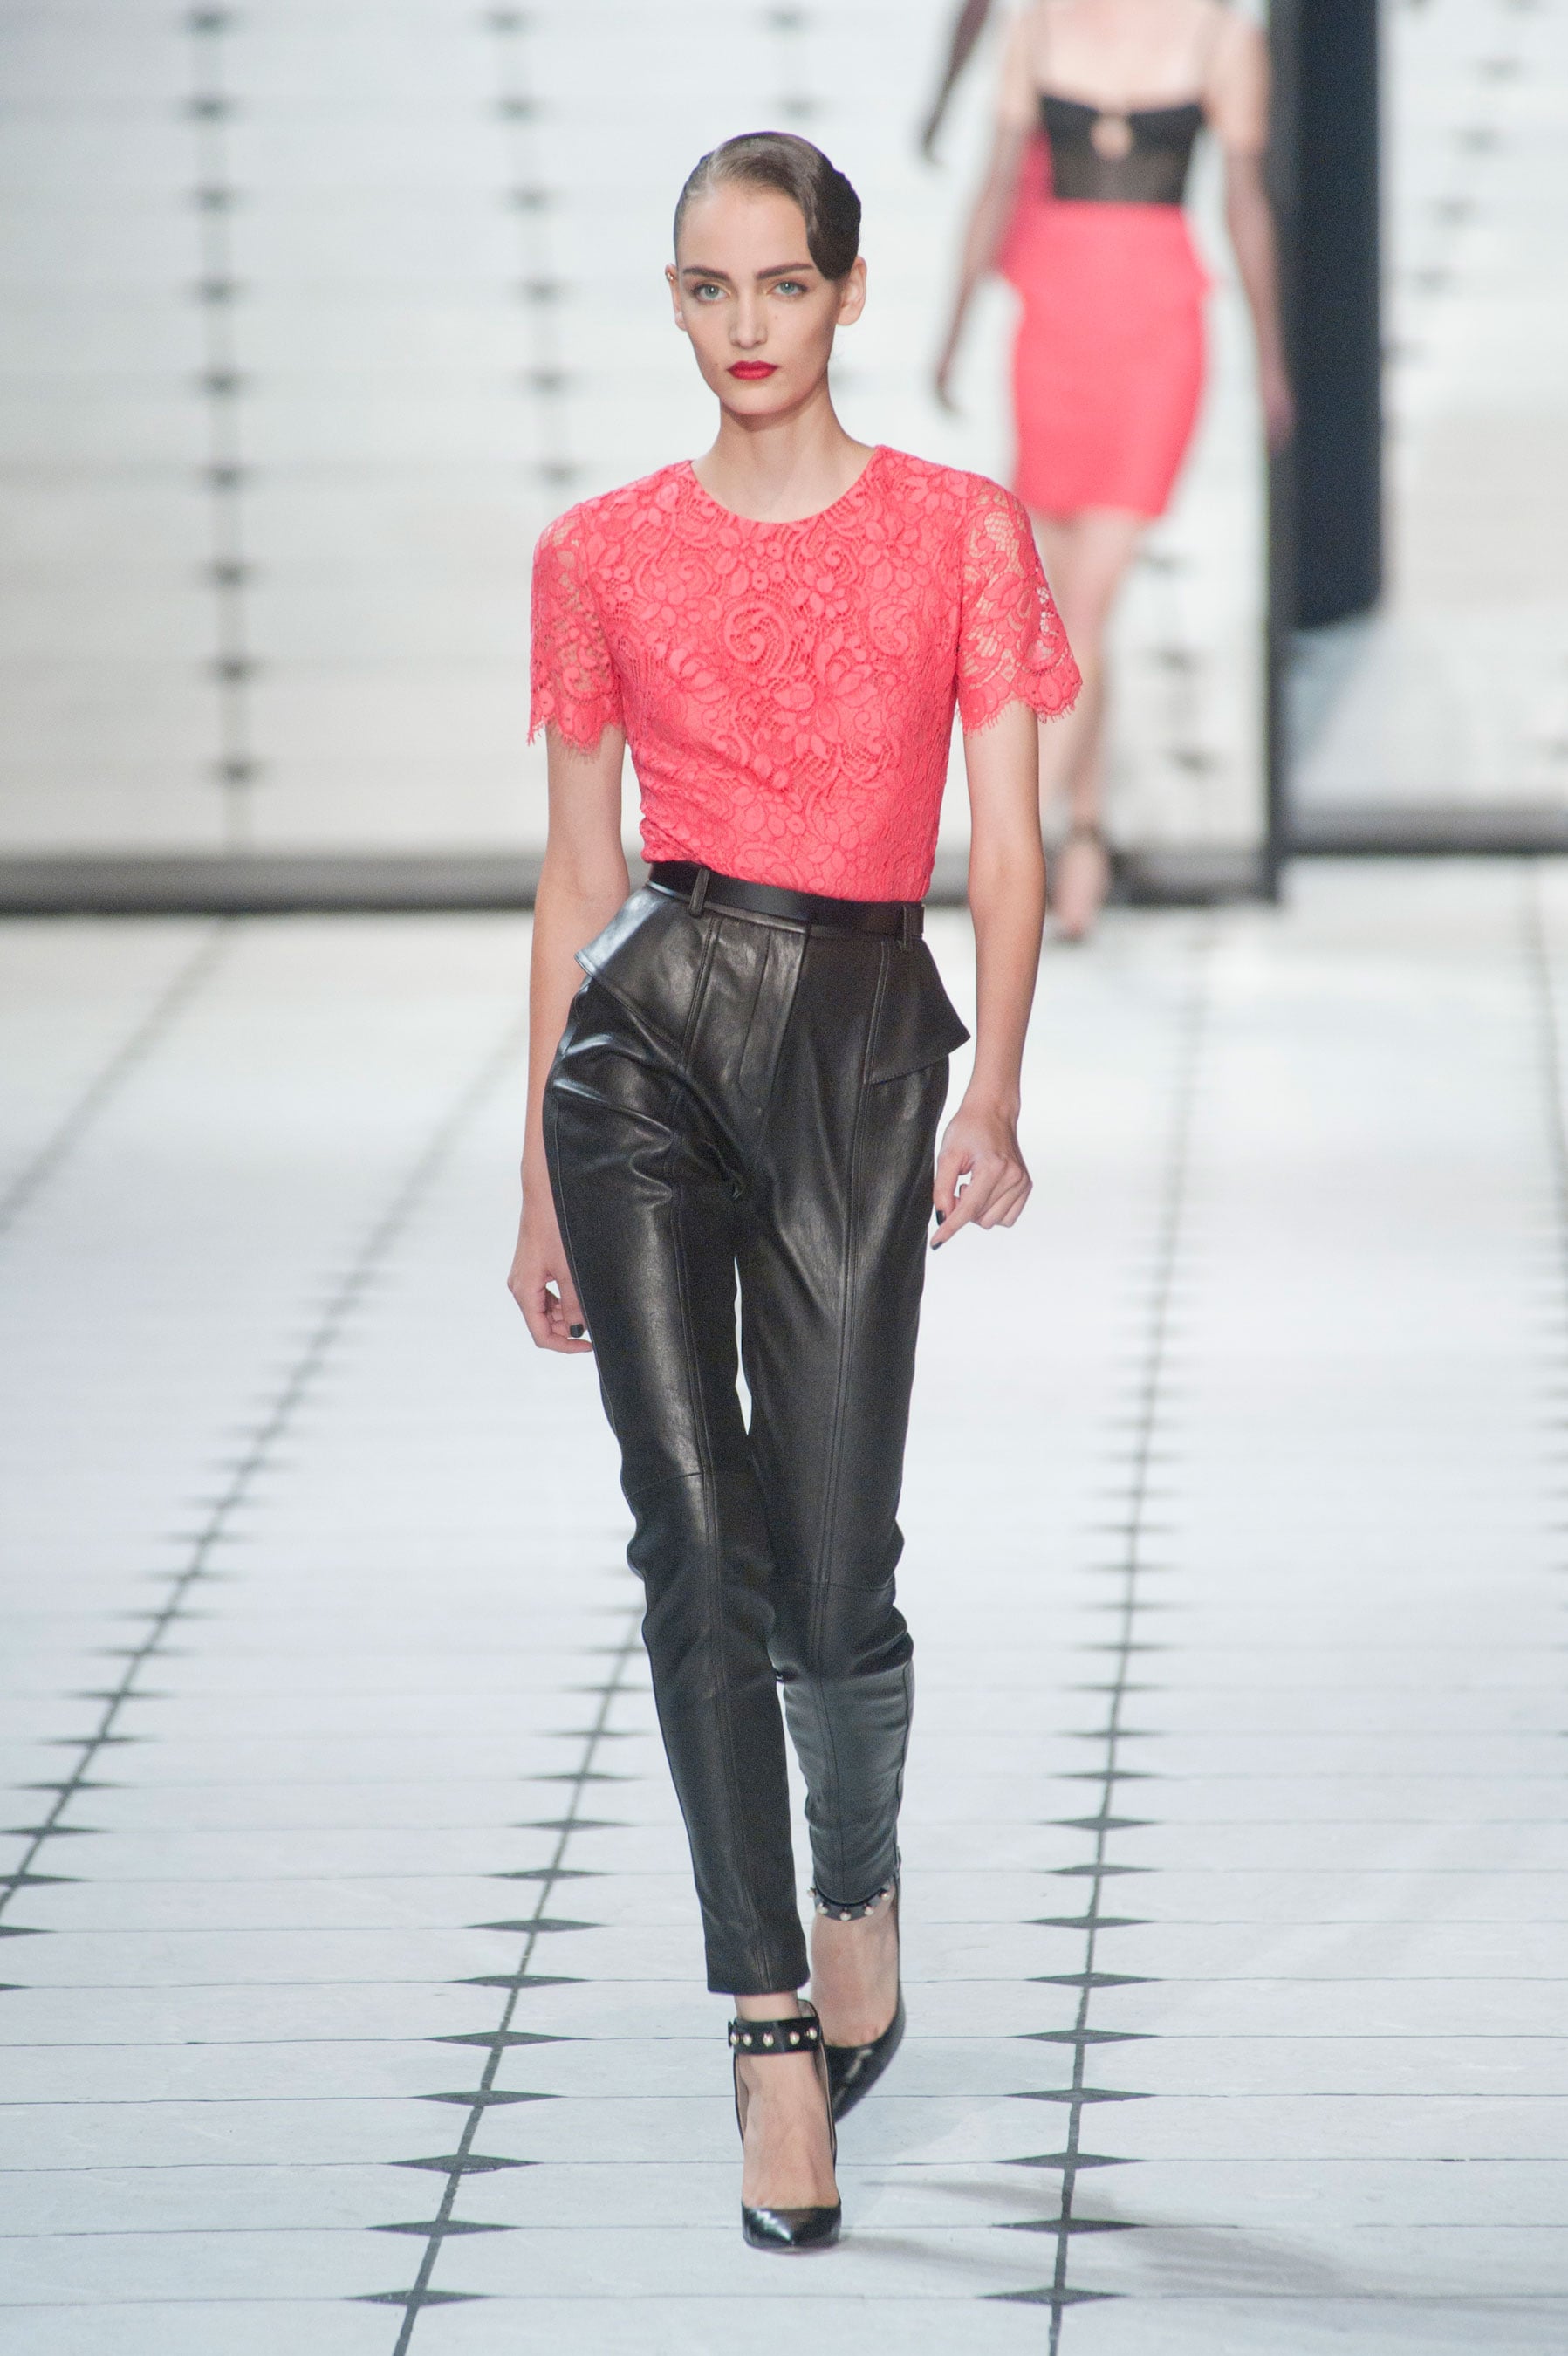 Jason Wu Spring 2013 | 43 Reasons Why We Can't Wait For Jason Wu's ...